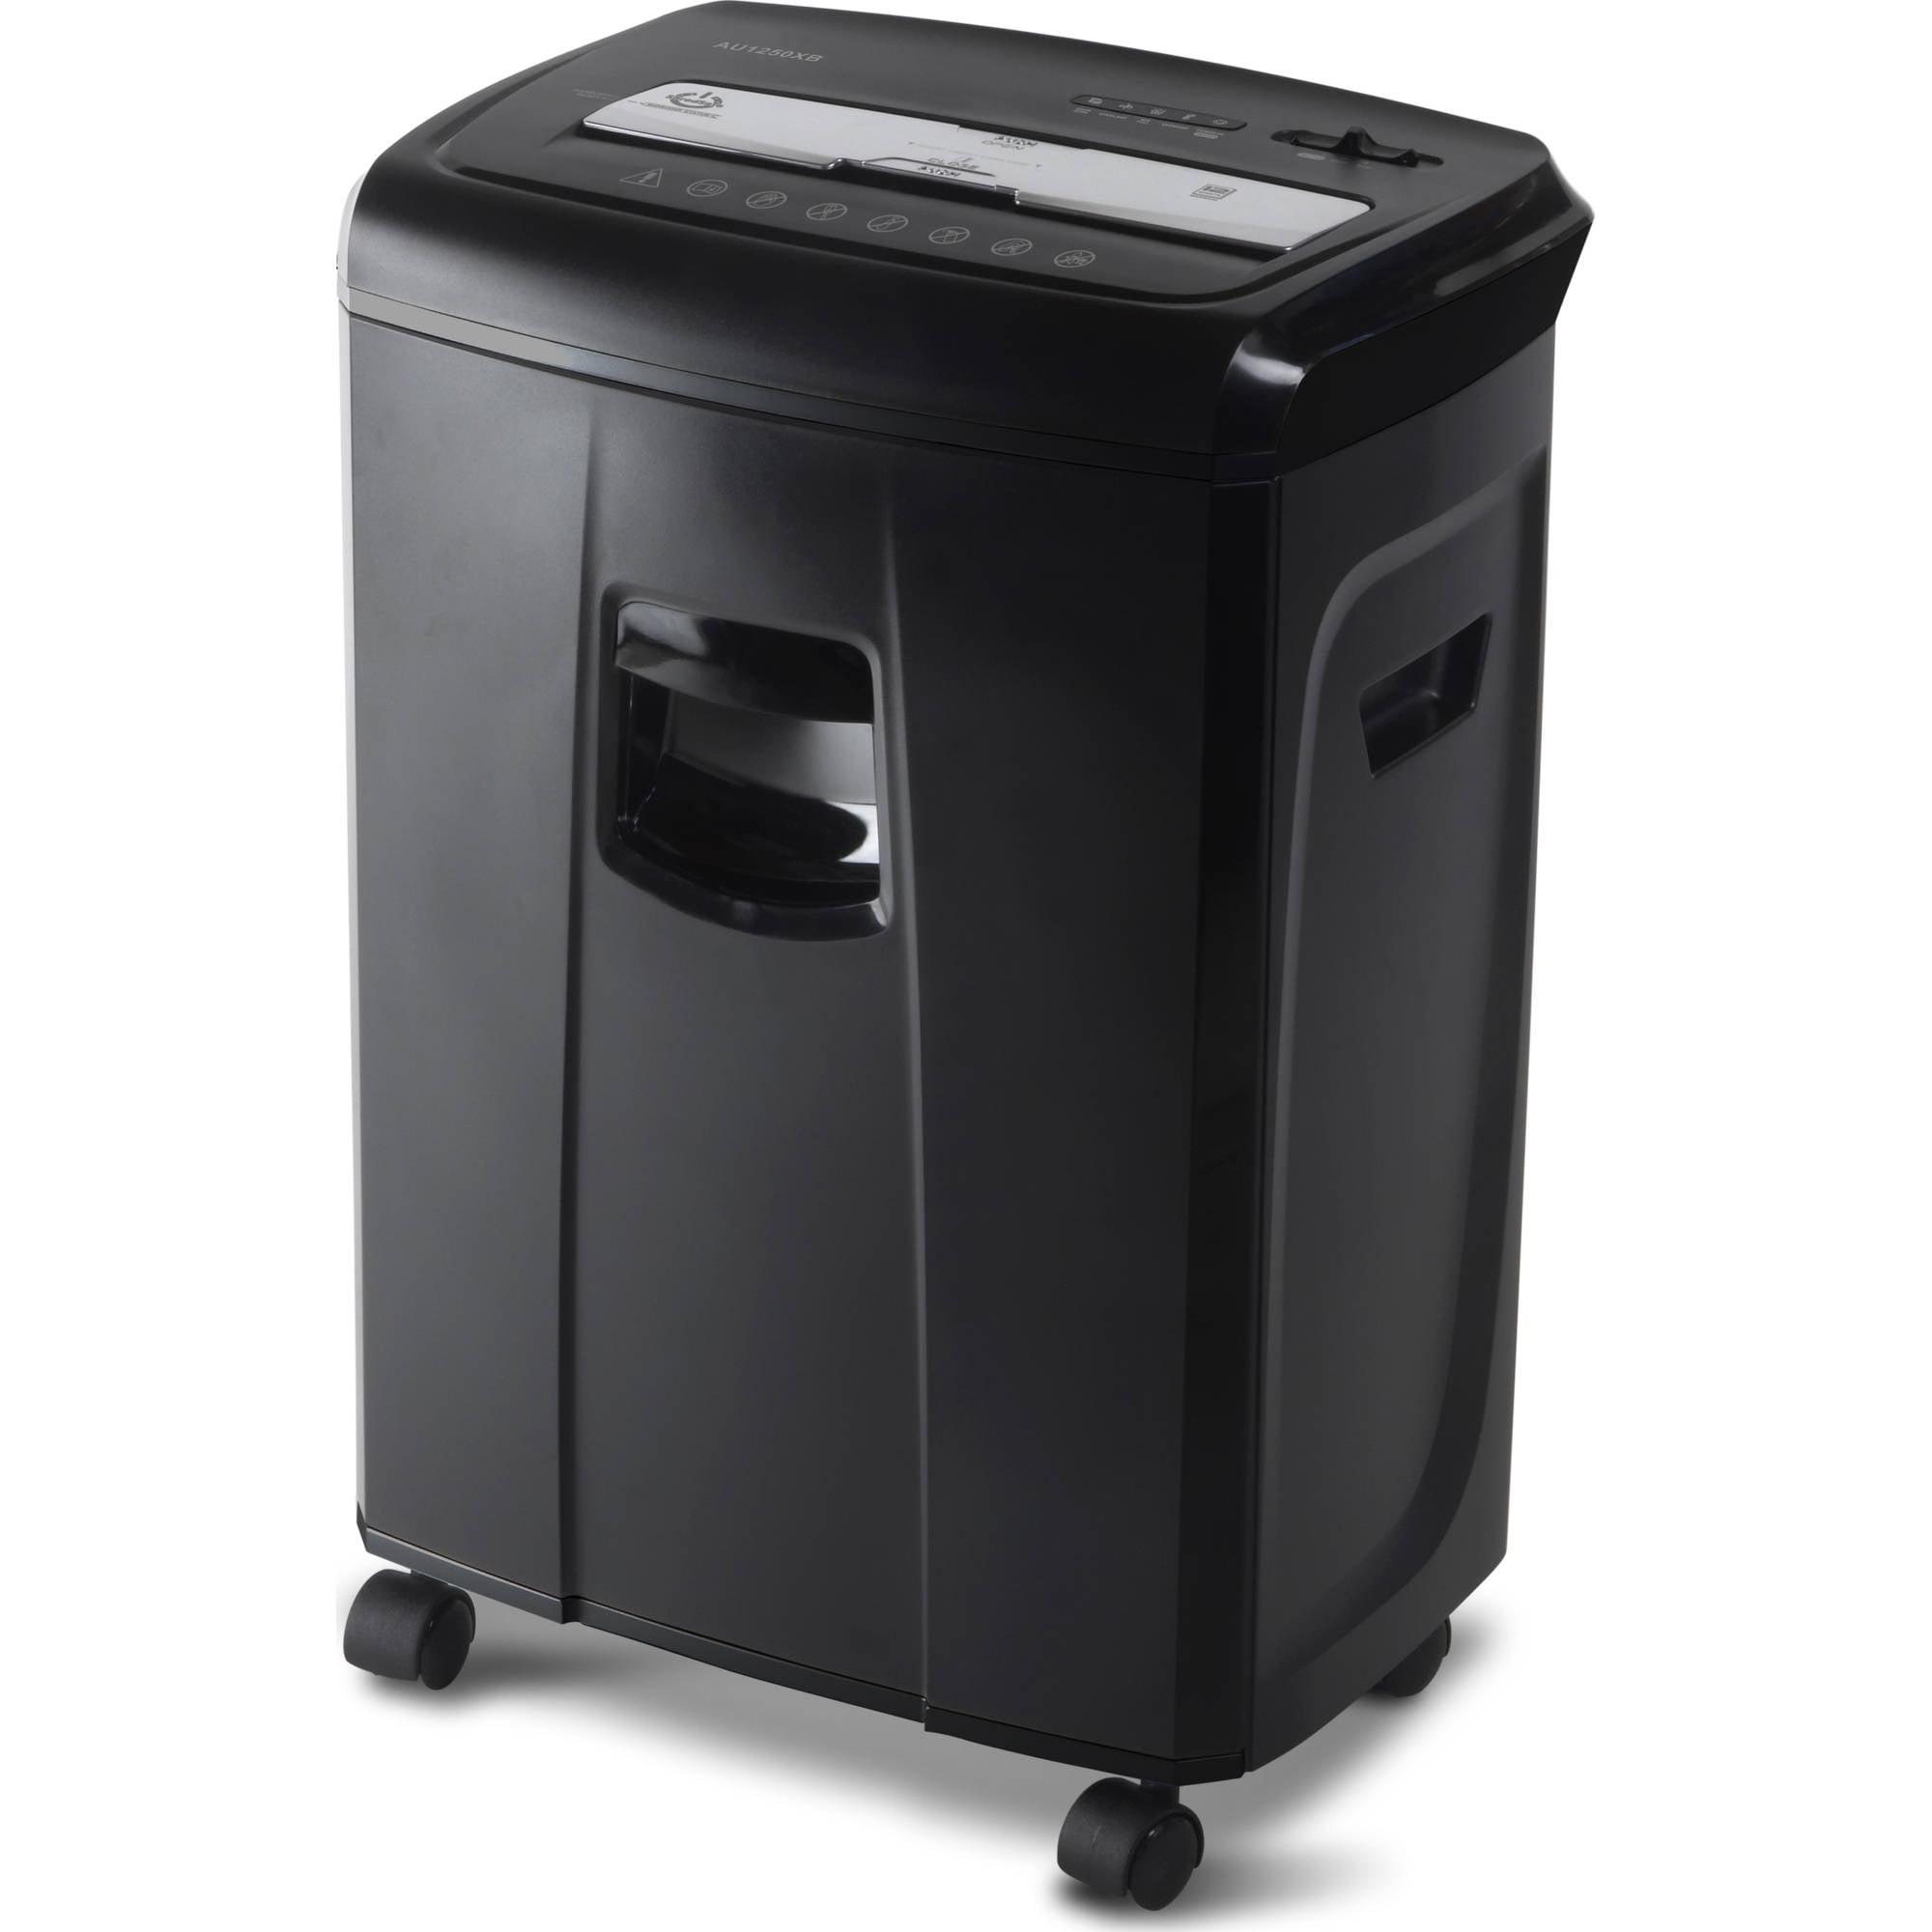 Aurora GB 12-Sheet Crosscut Paper and Credit Card Shredder with